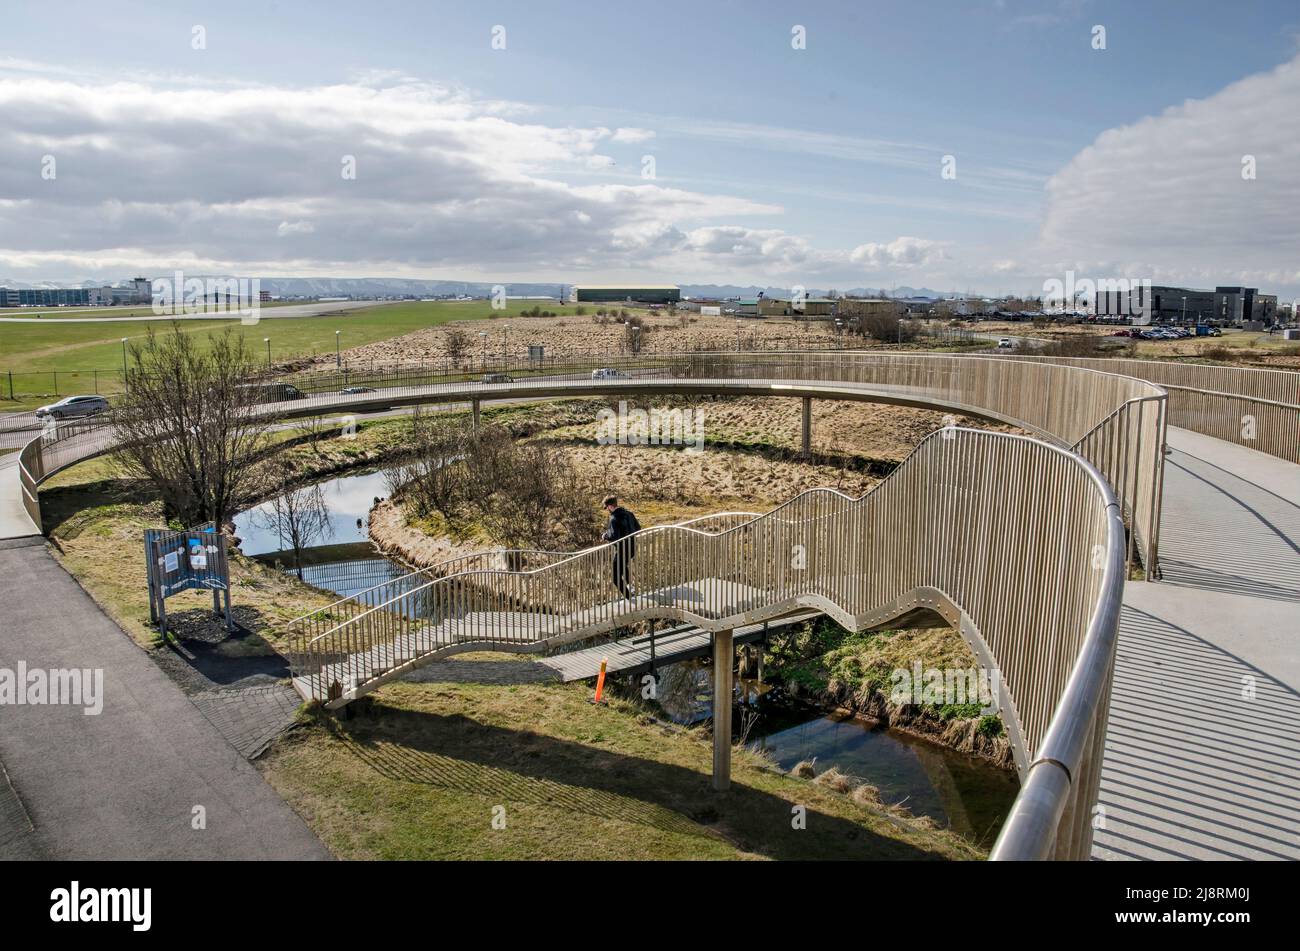 Reykjavik, Iceland, April 25, 2022: stylefully designed pedestrian overpass with Vatnsmyri domestic airport in the background Stock Photo